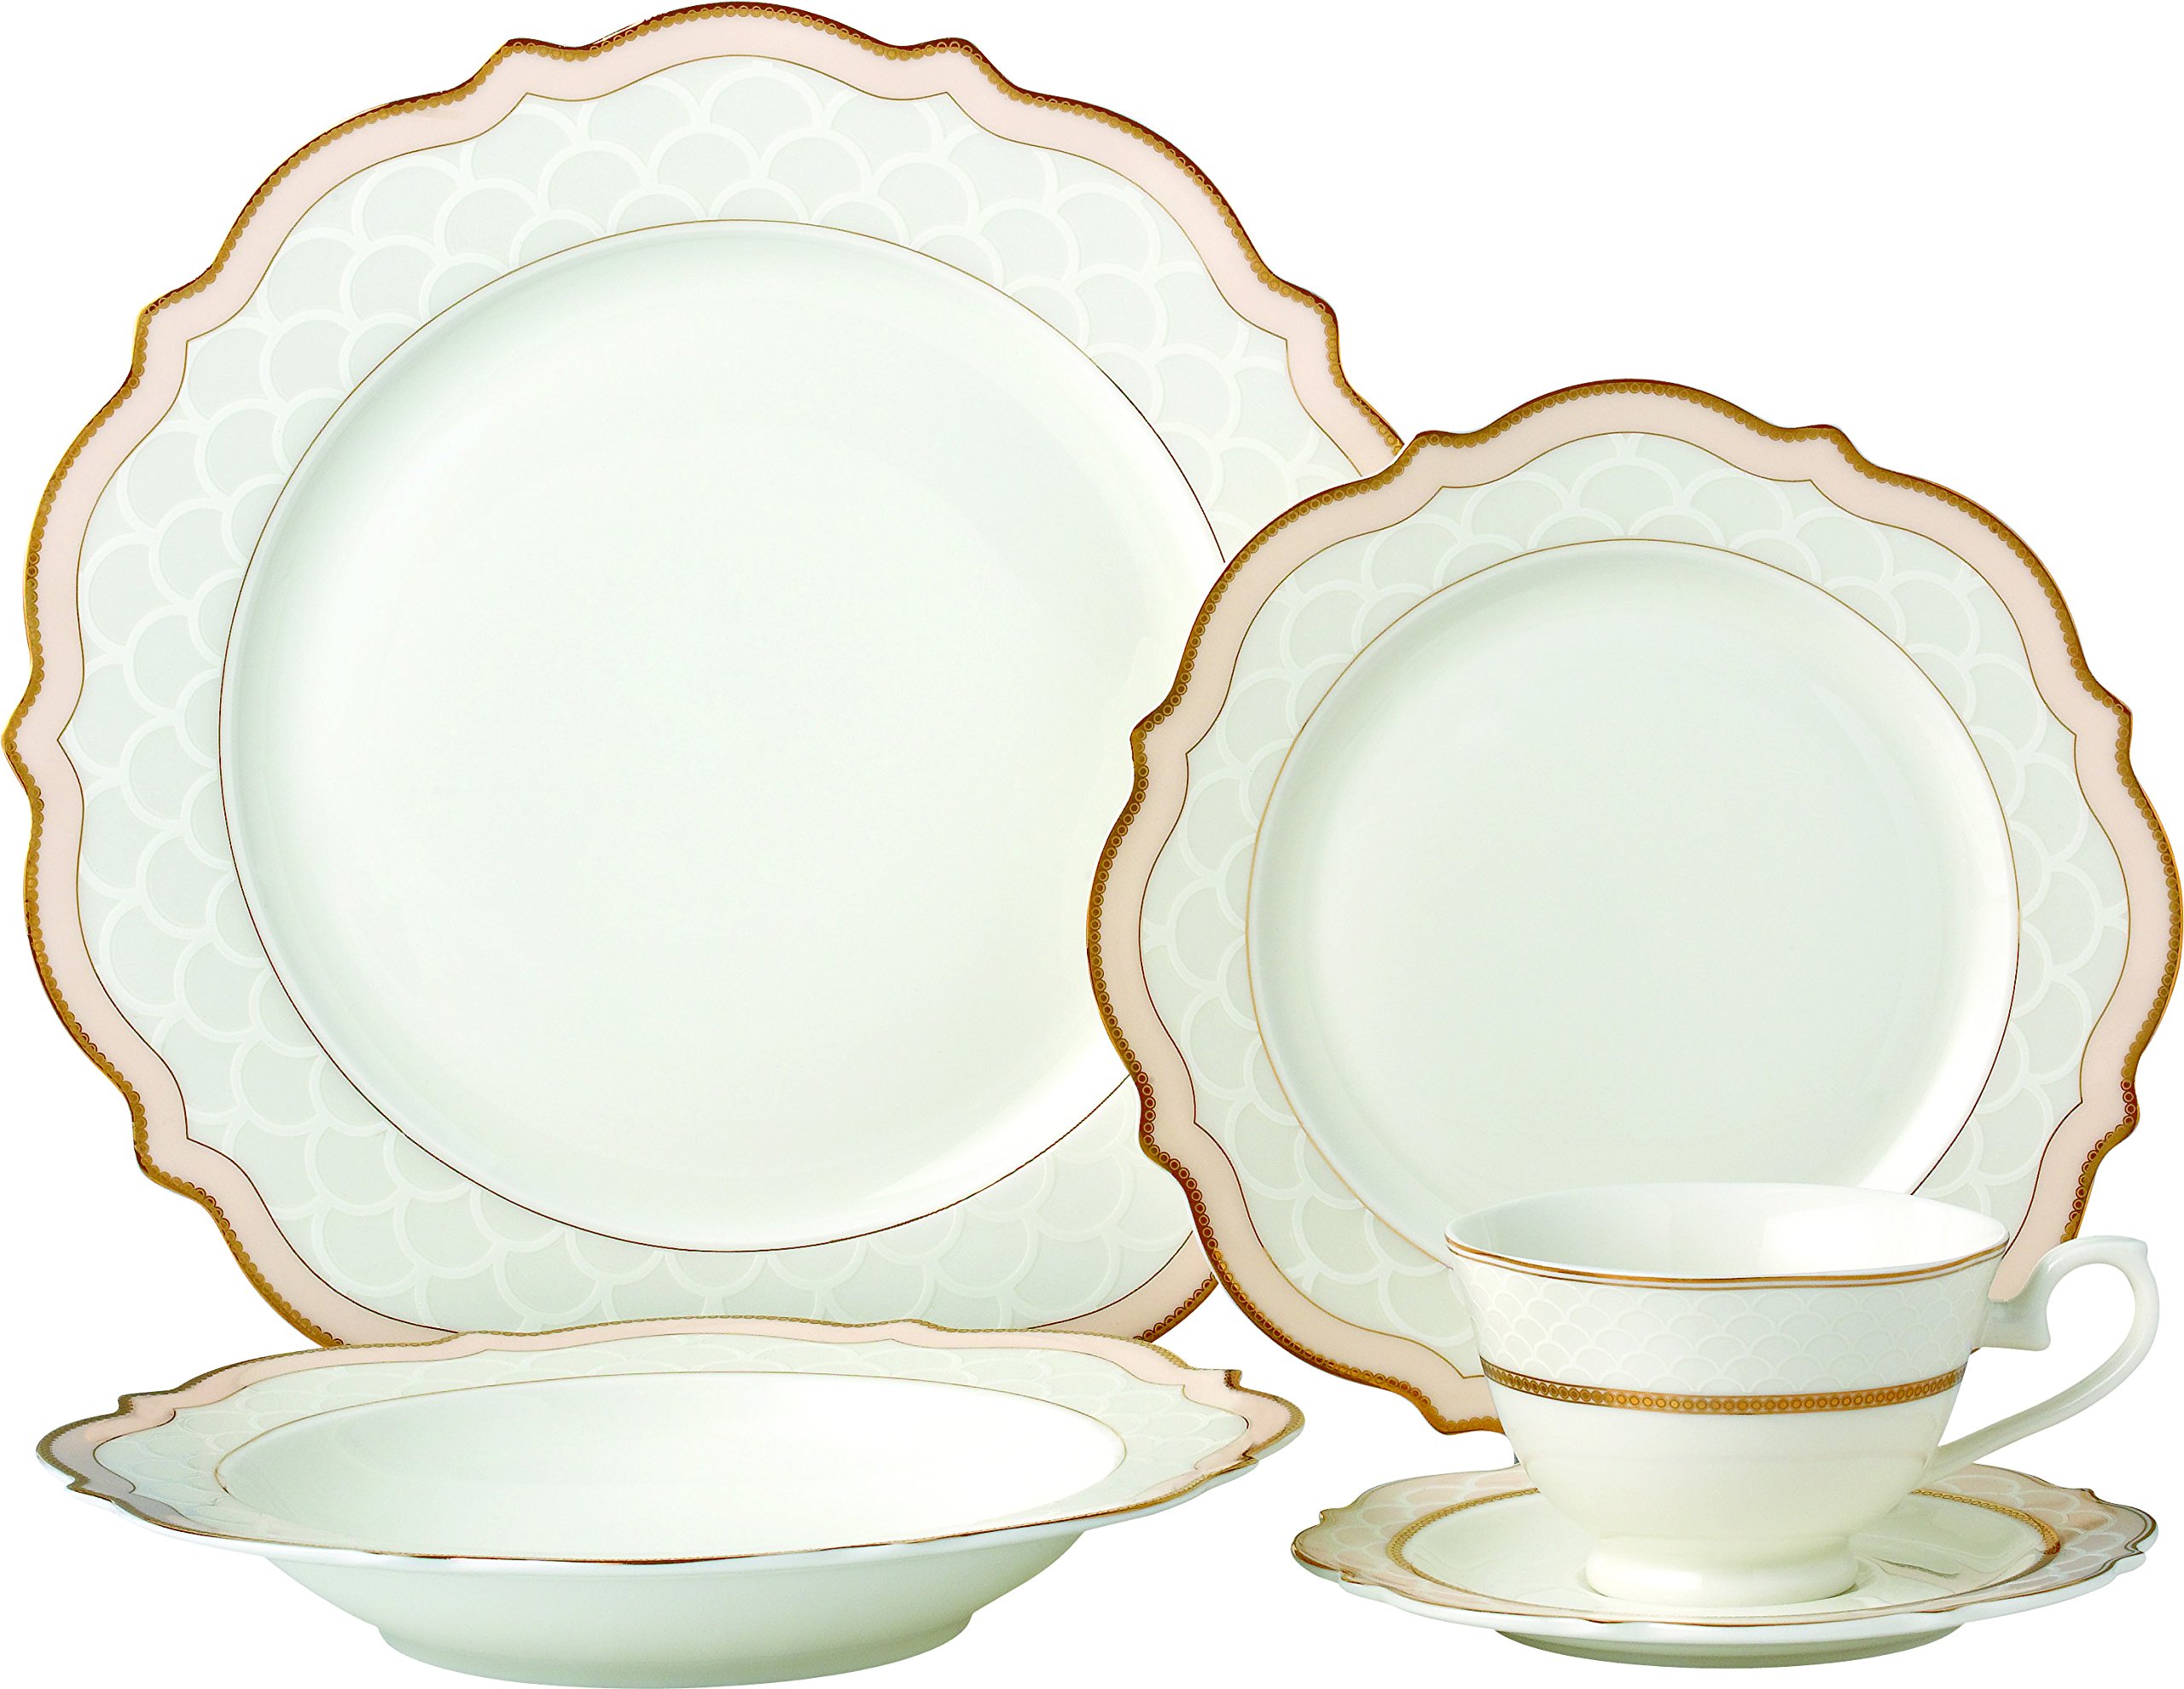 20-pc. Dinner Set Service for 4, 24K Gold-plated Luxury Bone China Tableware ("First Blush" 6664-20) - image 1 of 1